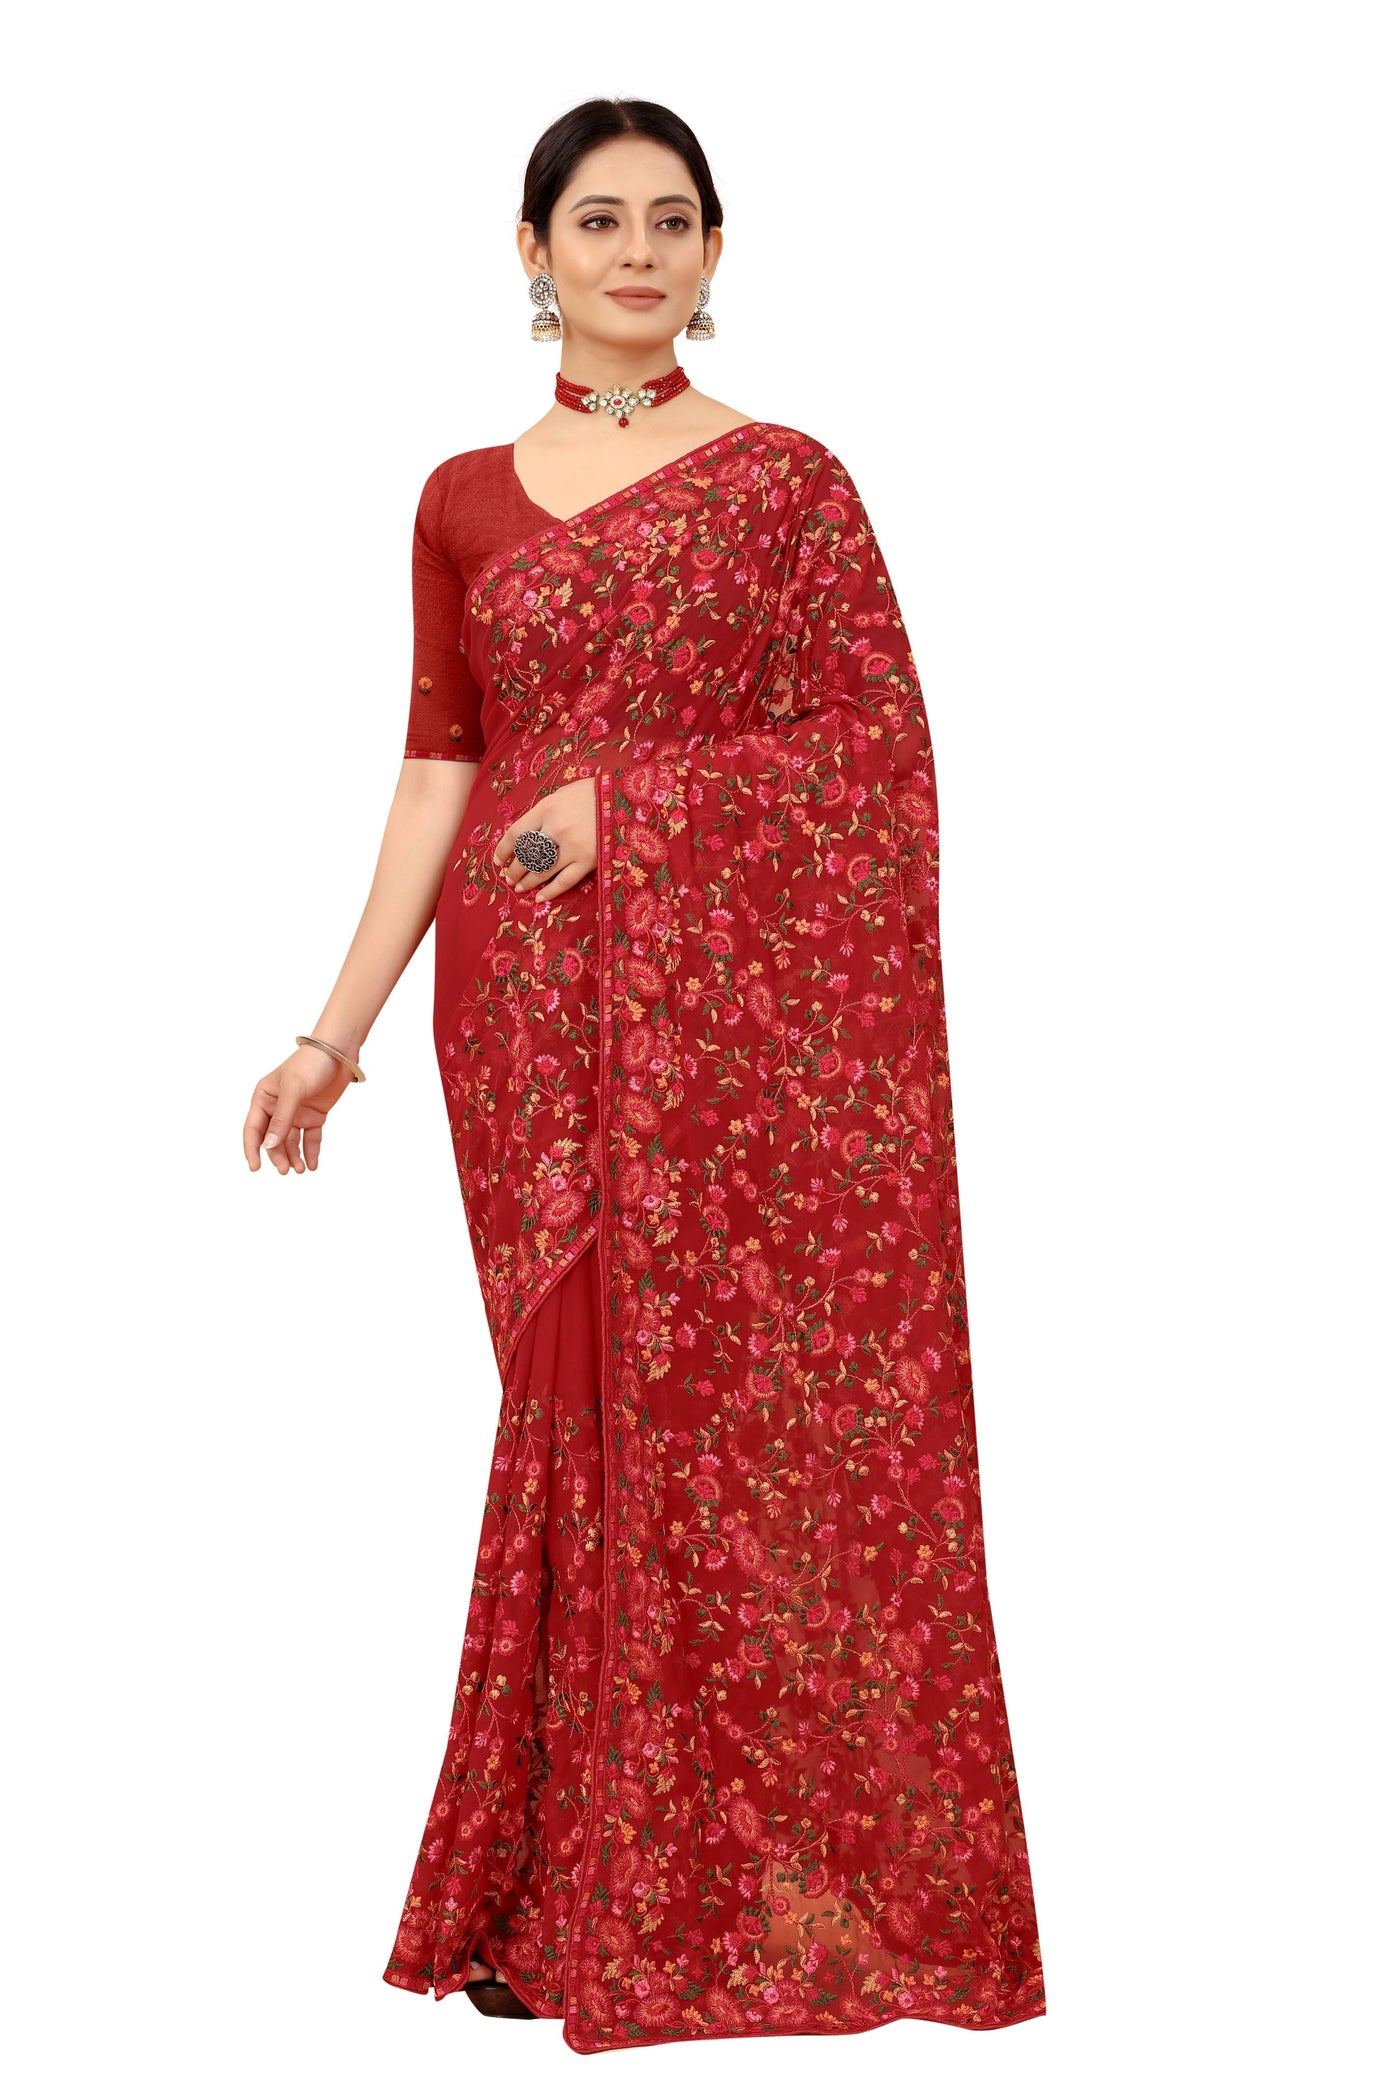 Red Georgette Embroidered Saree With Blouse